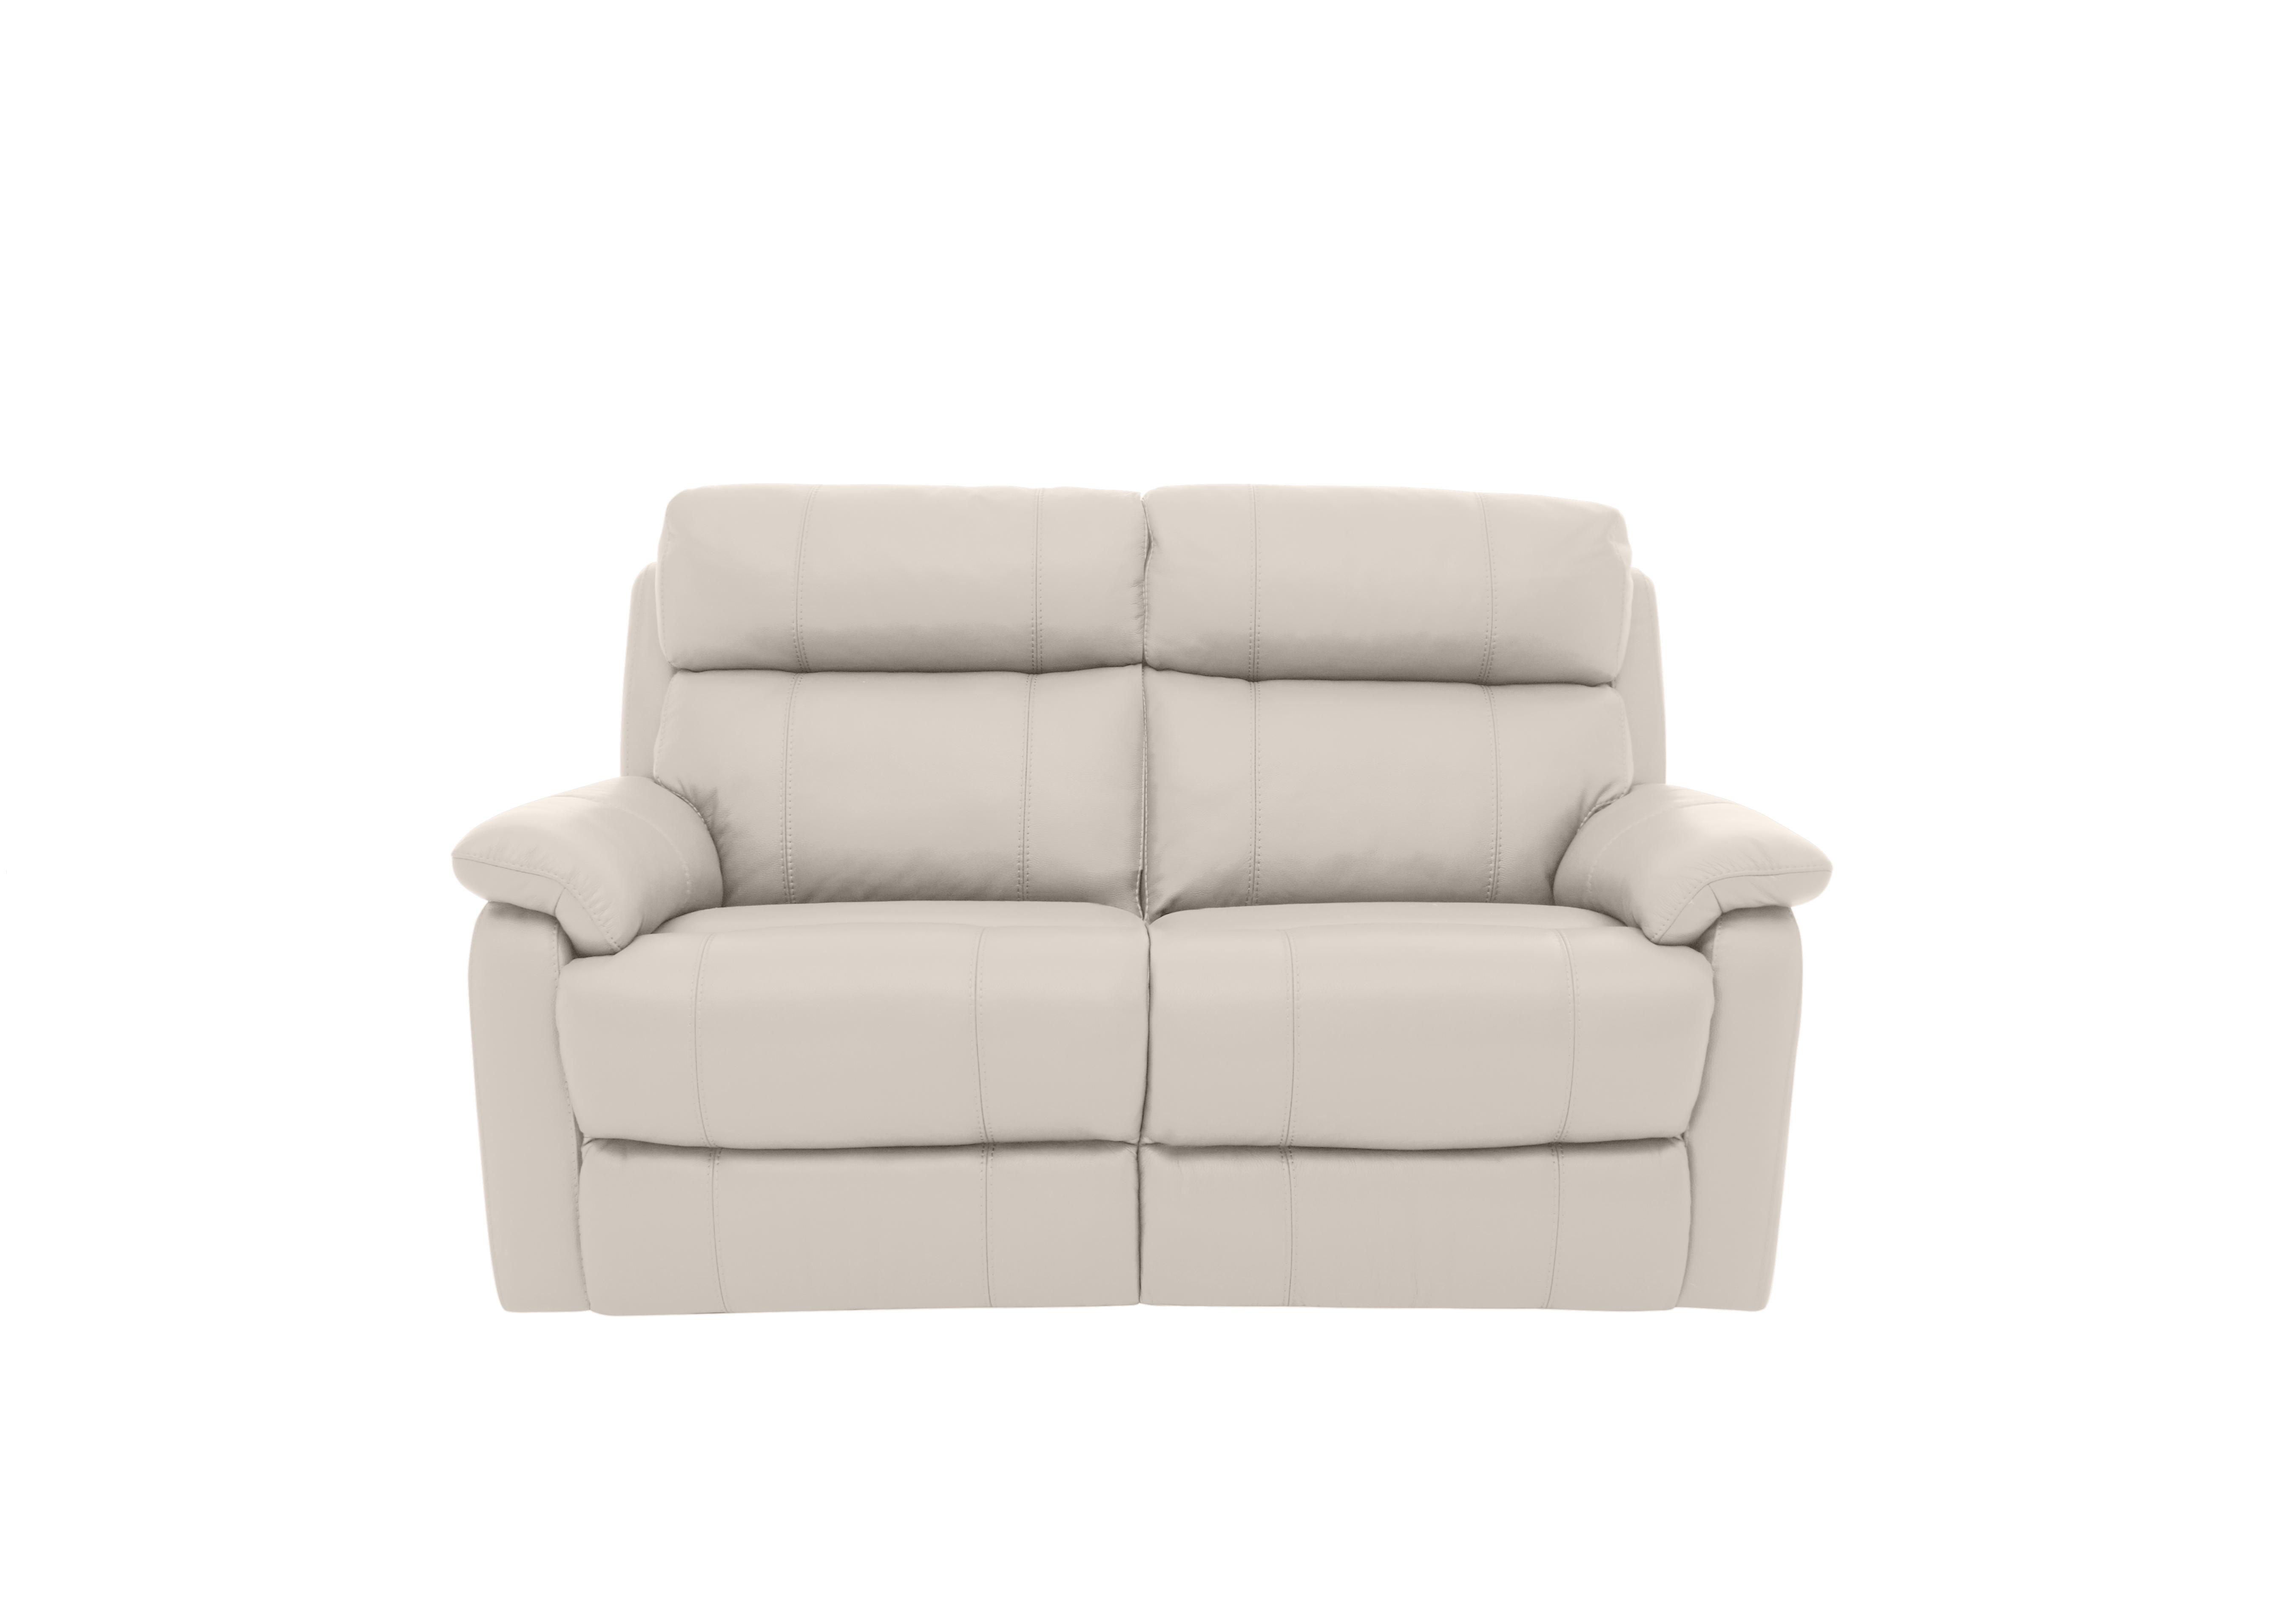 Relax Station Komodo 2 Seater Power Leather Sofa in Bv-156e Frost on Furniture Village